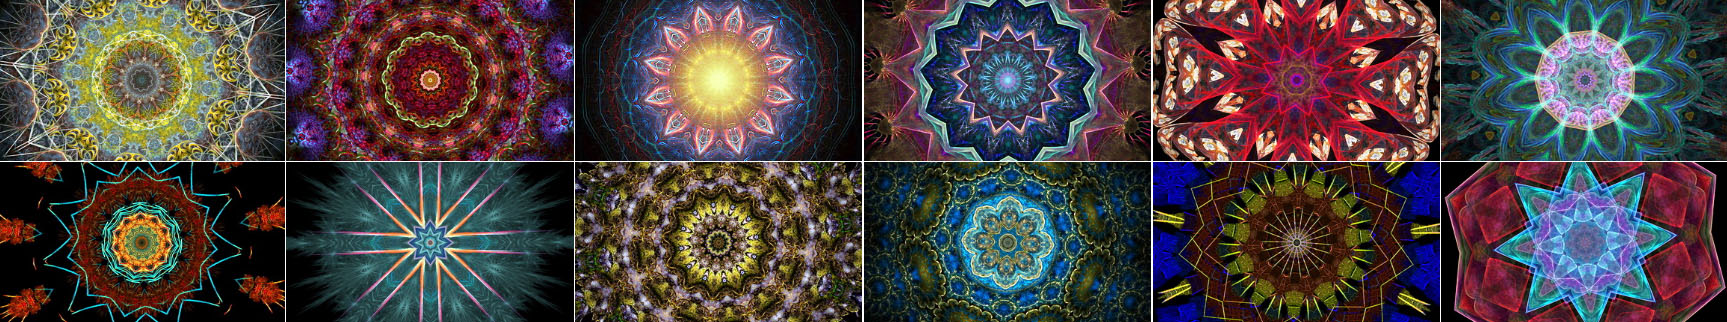 Small Screenshots from These Kaleidoscope Videos